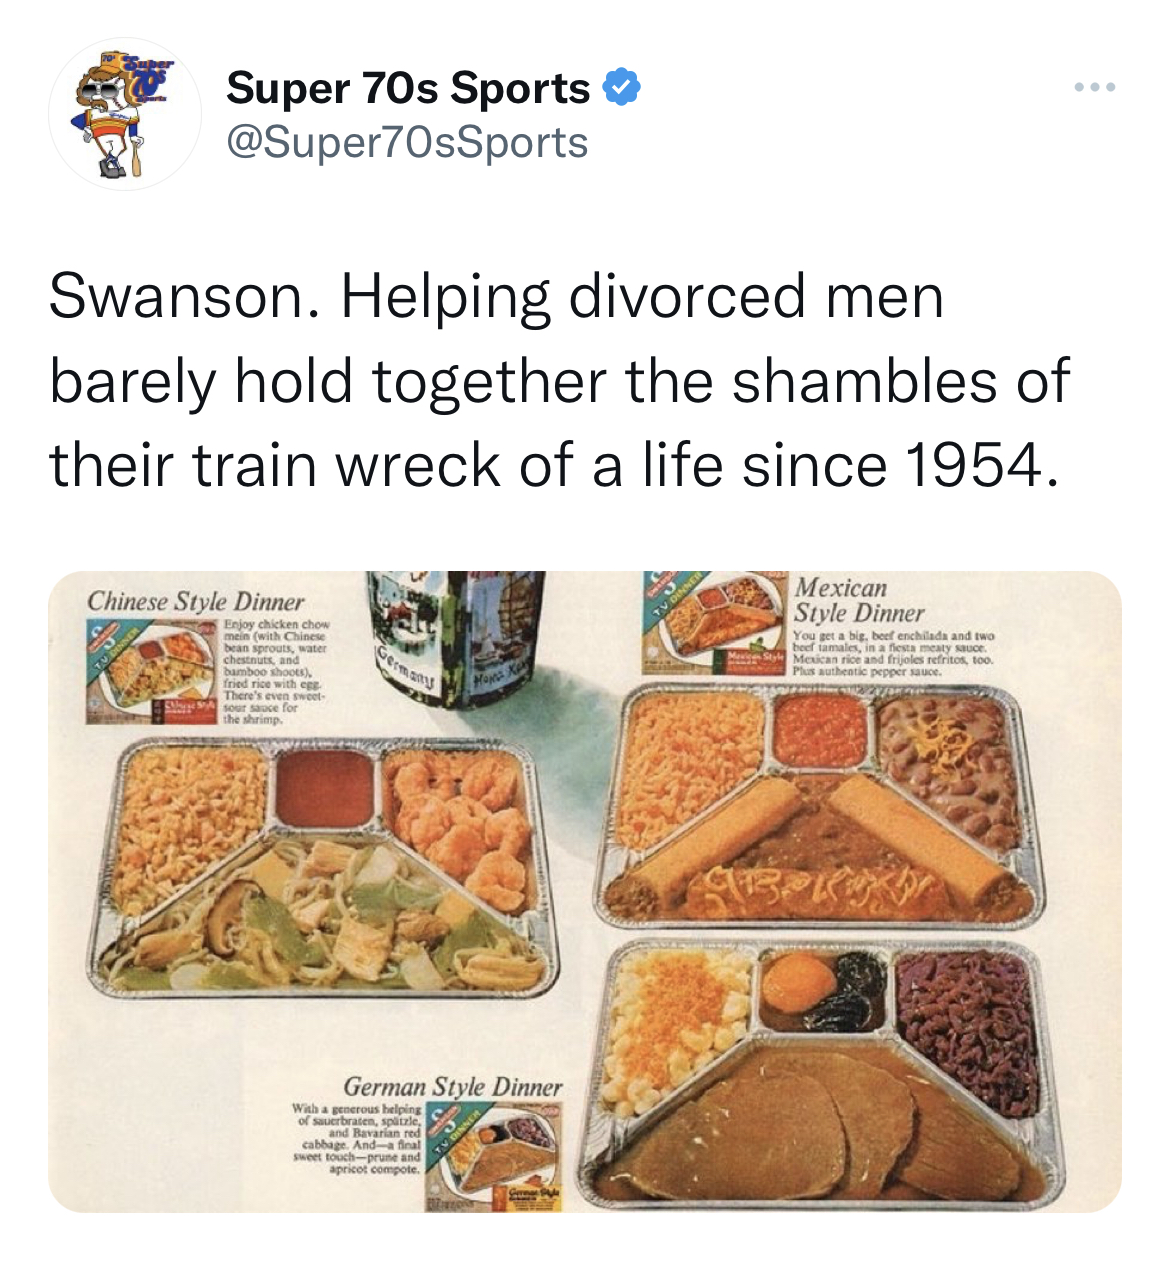 tweets dunking on celebs - tv dinner - Super 70s Sports Swanson. Helping divorced men barely hold together the shambles of their train wreck of a life since 1954. Chinese Style Dinner German Style Dinner 13 Mexican Style Dinner